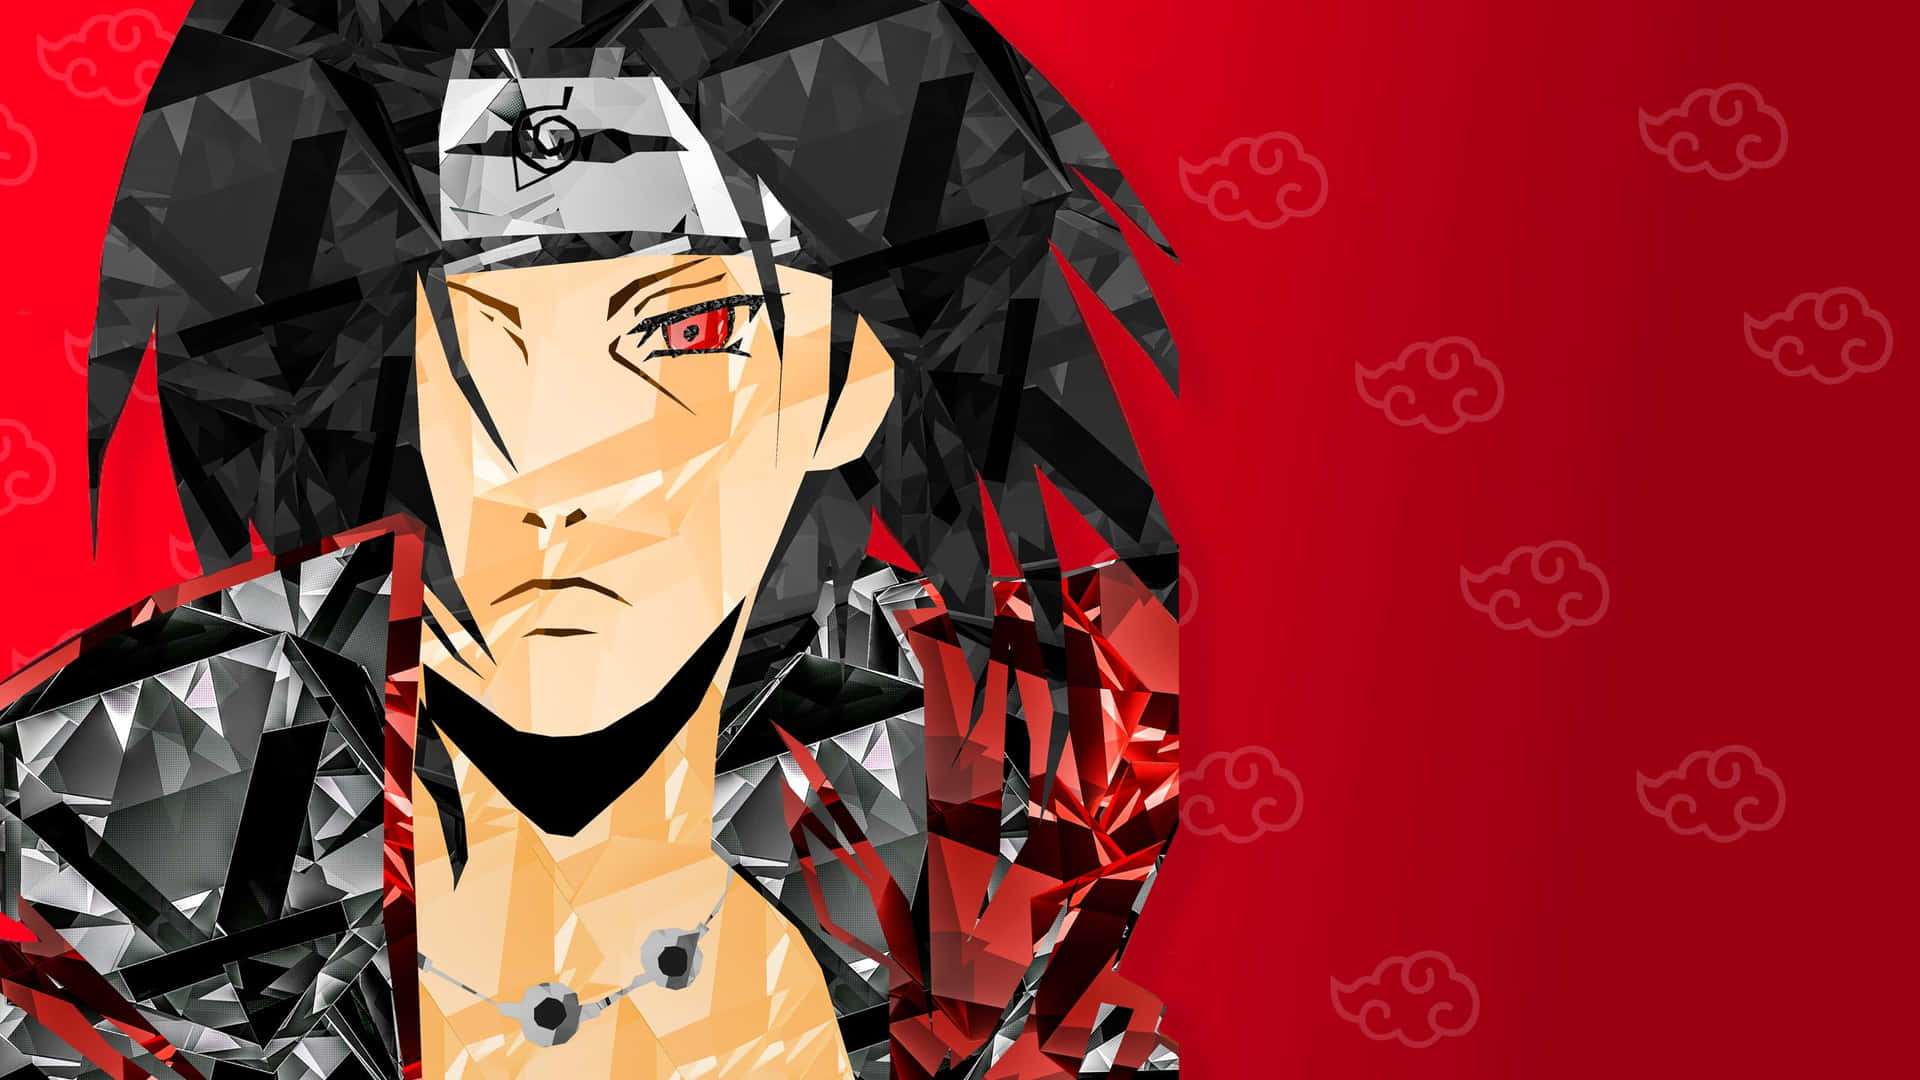 Abstract Art Of Itachi Aesthetic With Akatsuki Clouds In Red Background Wallpaper